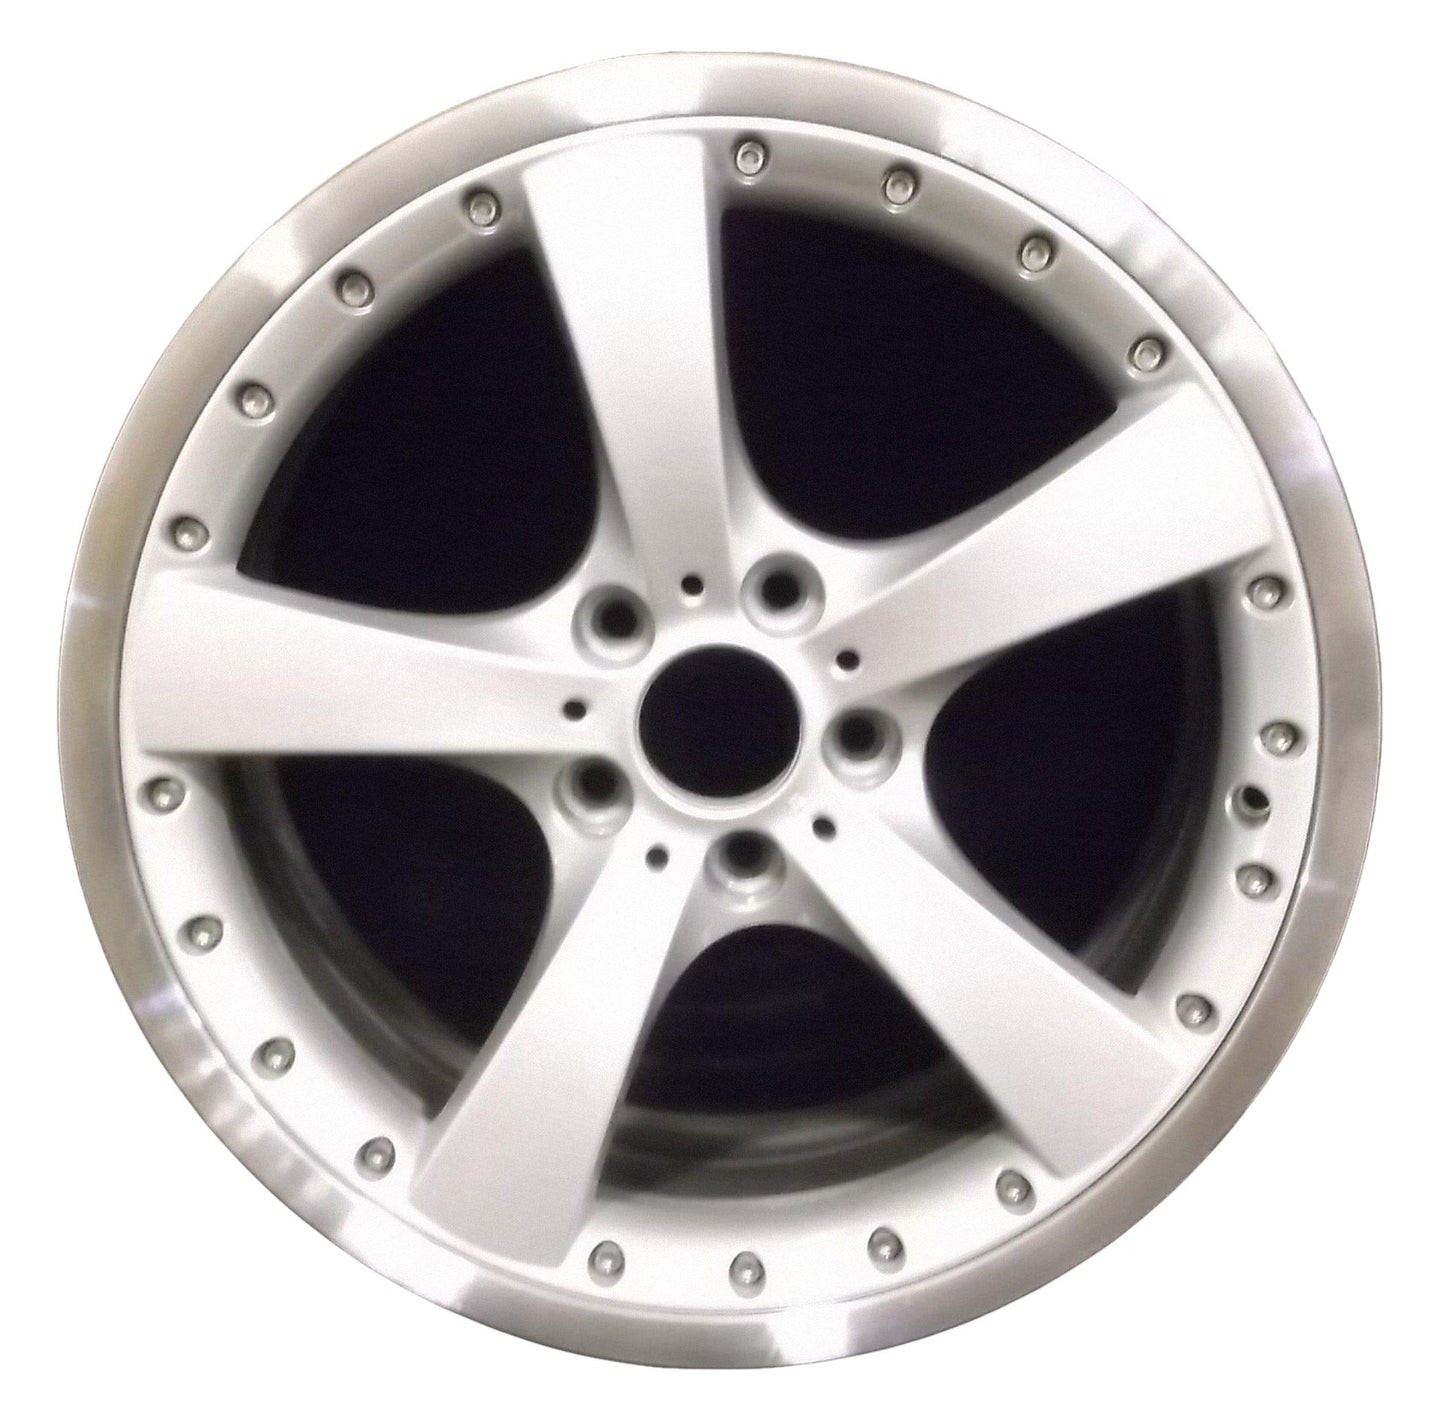 BMW 328i  2007, 2008, 2009, 2010, 2011, 2012, 2013 Factory OEM Car Wheel Size 19x9 Alloy WAO.59589RE.PS14.FC